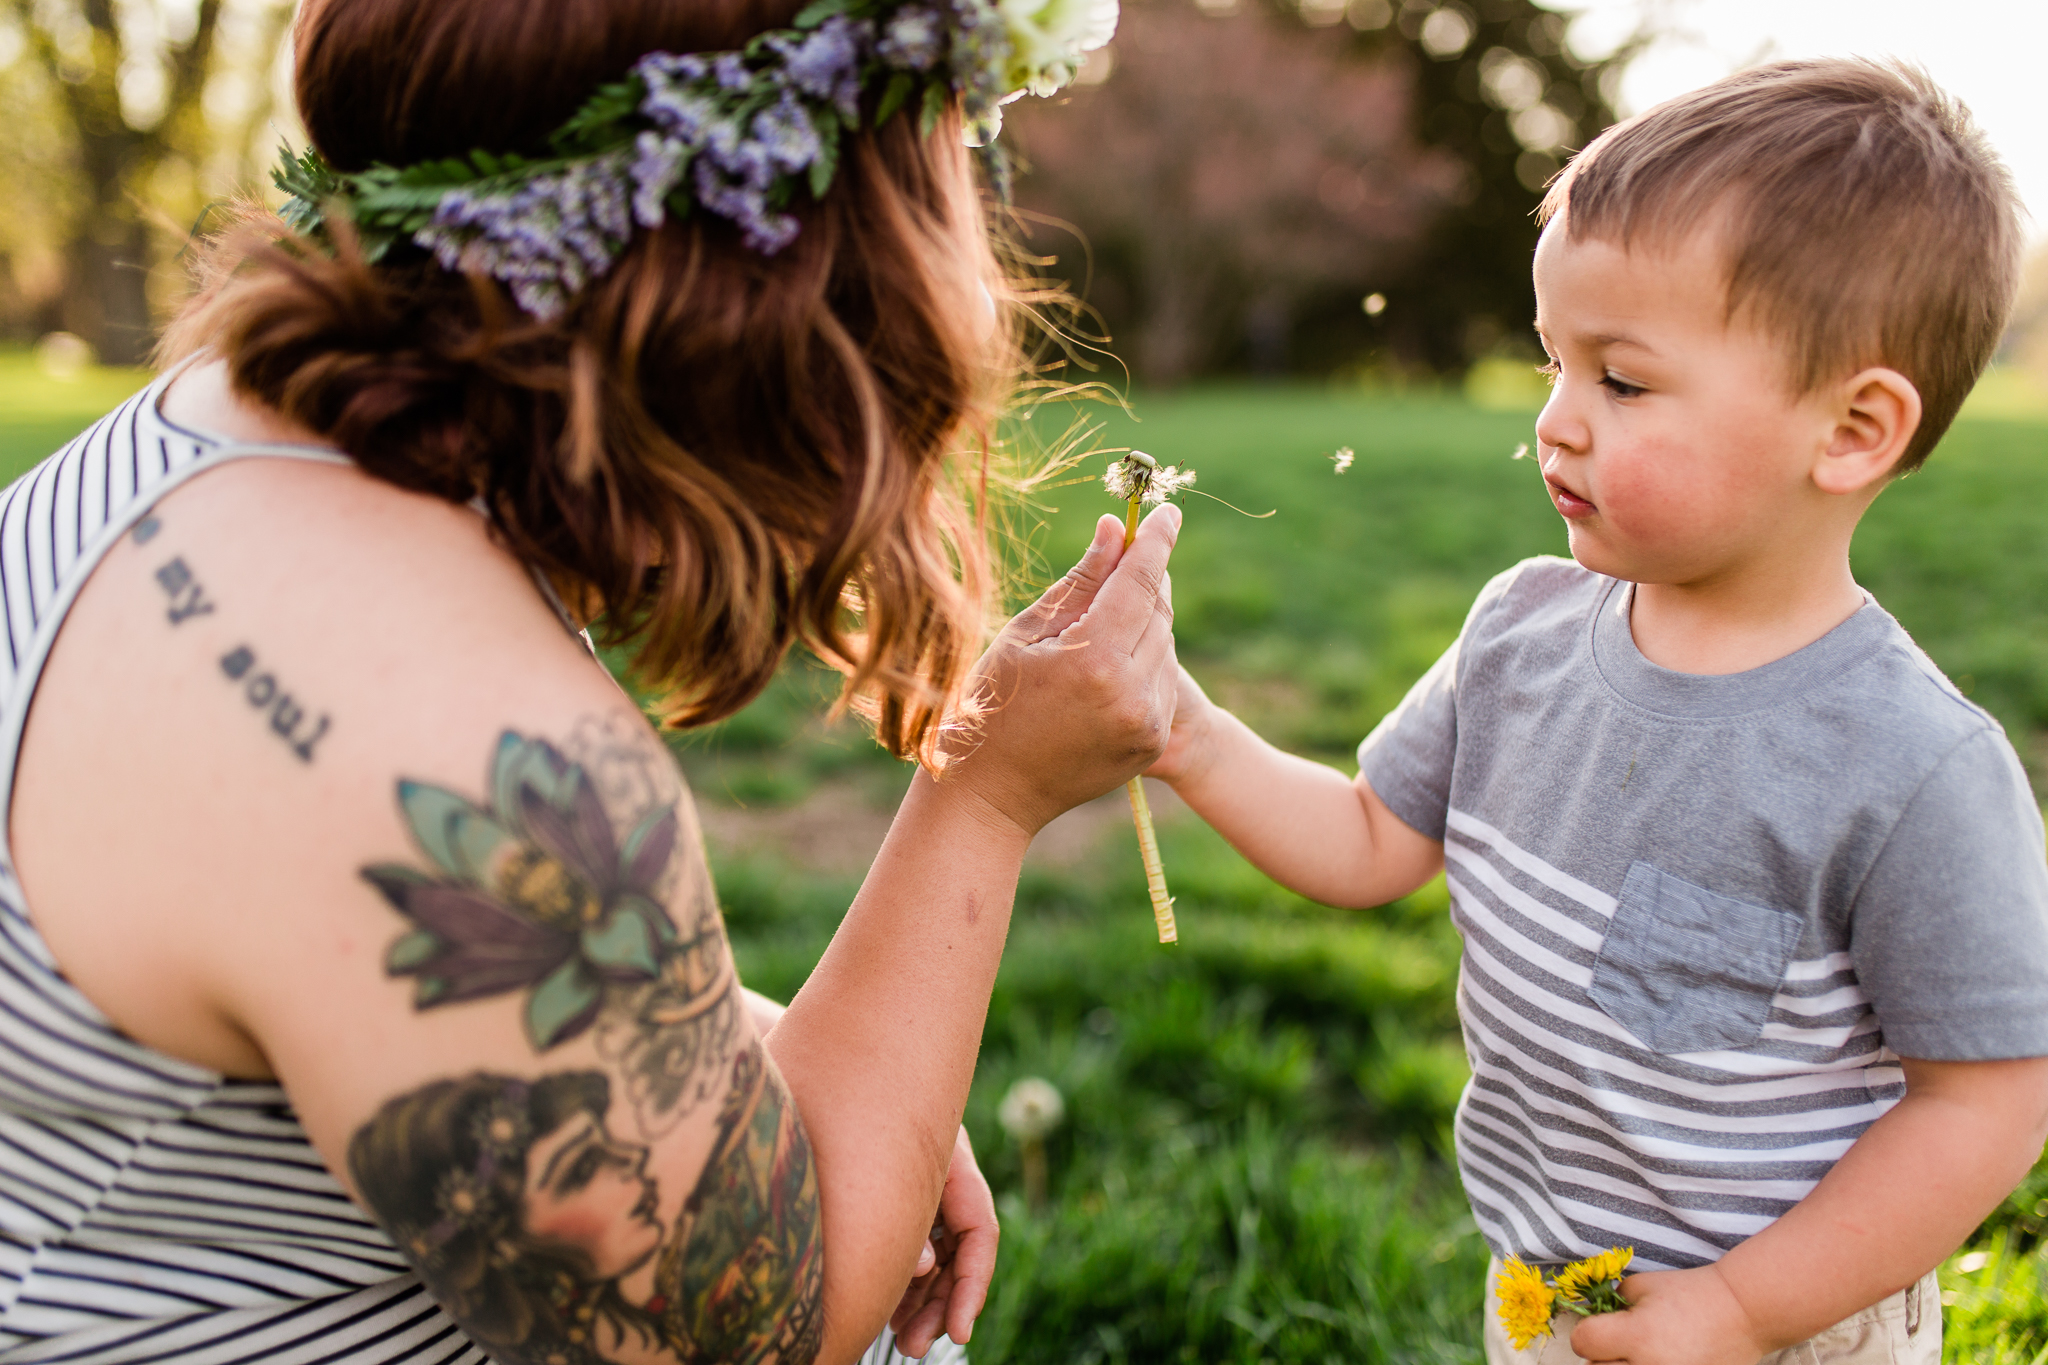  Mother and son blow dandelions together, Kansas City family photography, candid family photos, Rebecca Clair Photography 